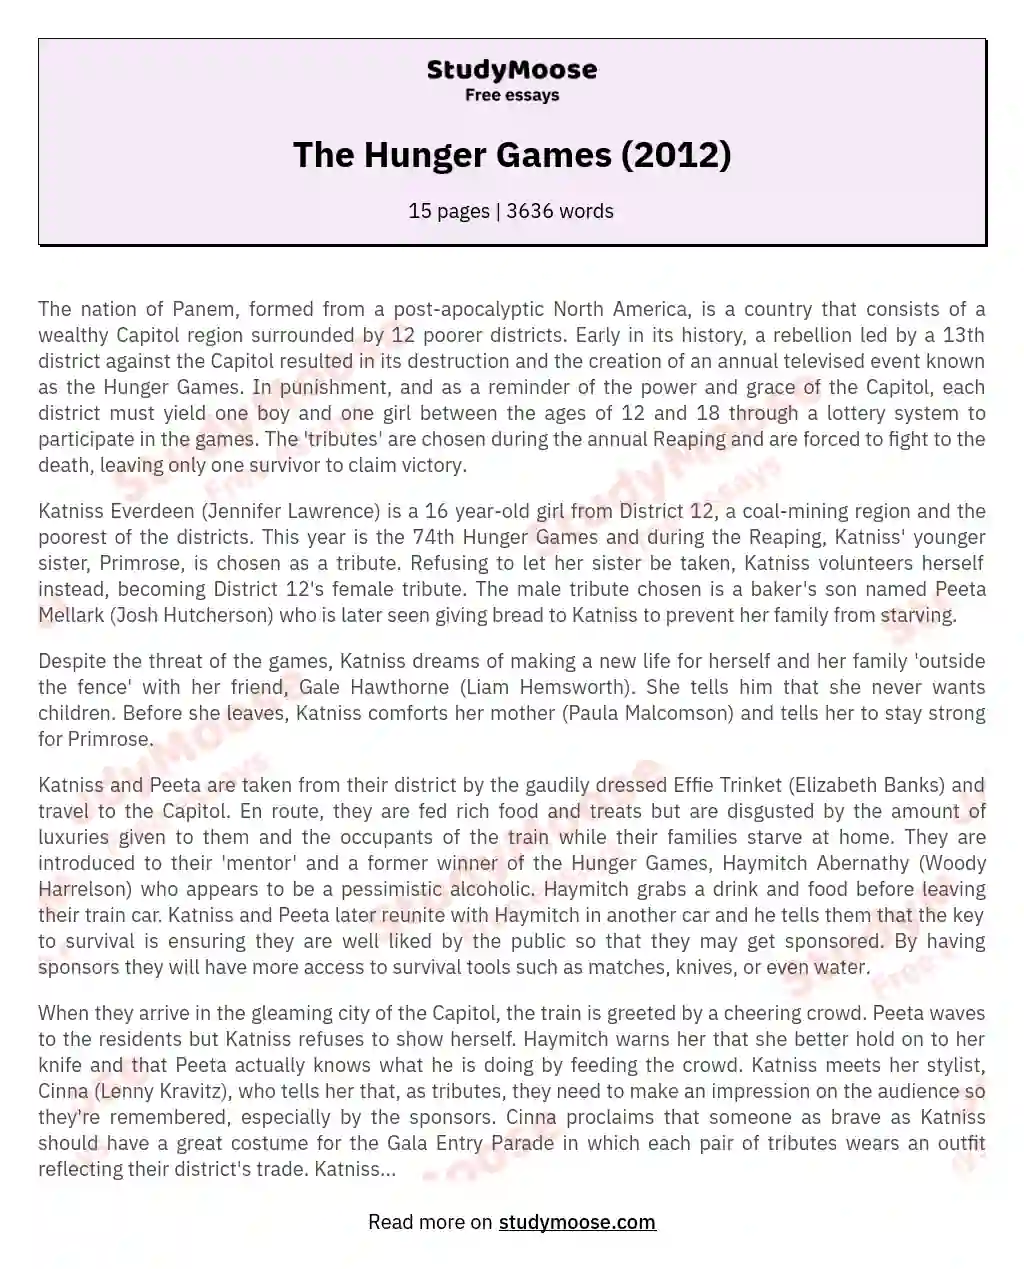 The Hunger Games (2012) essay